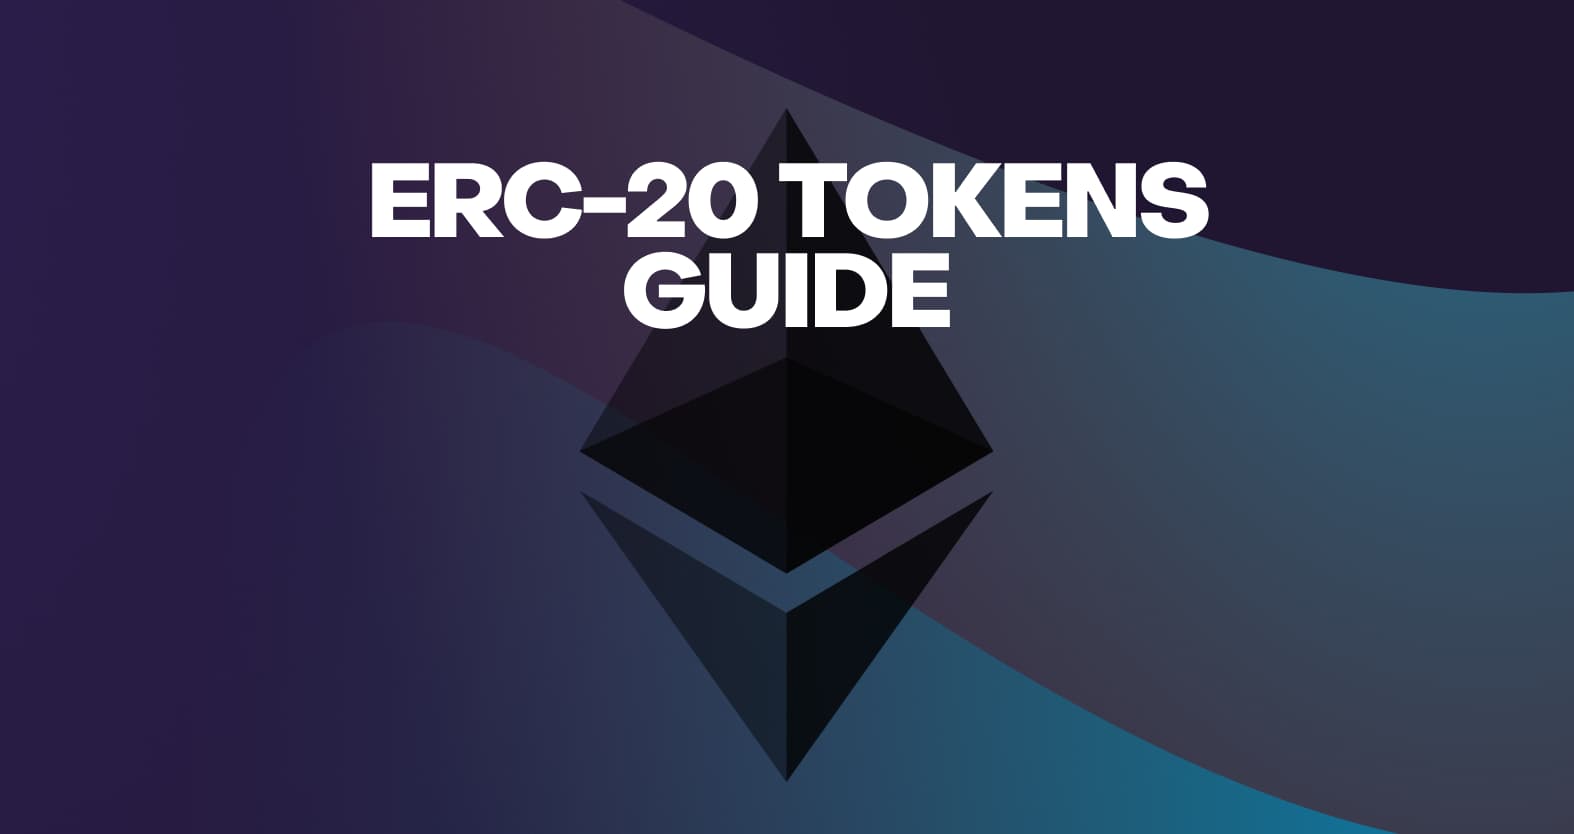 Ethereum and the ERC-20 Token Standard